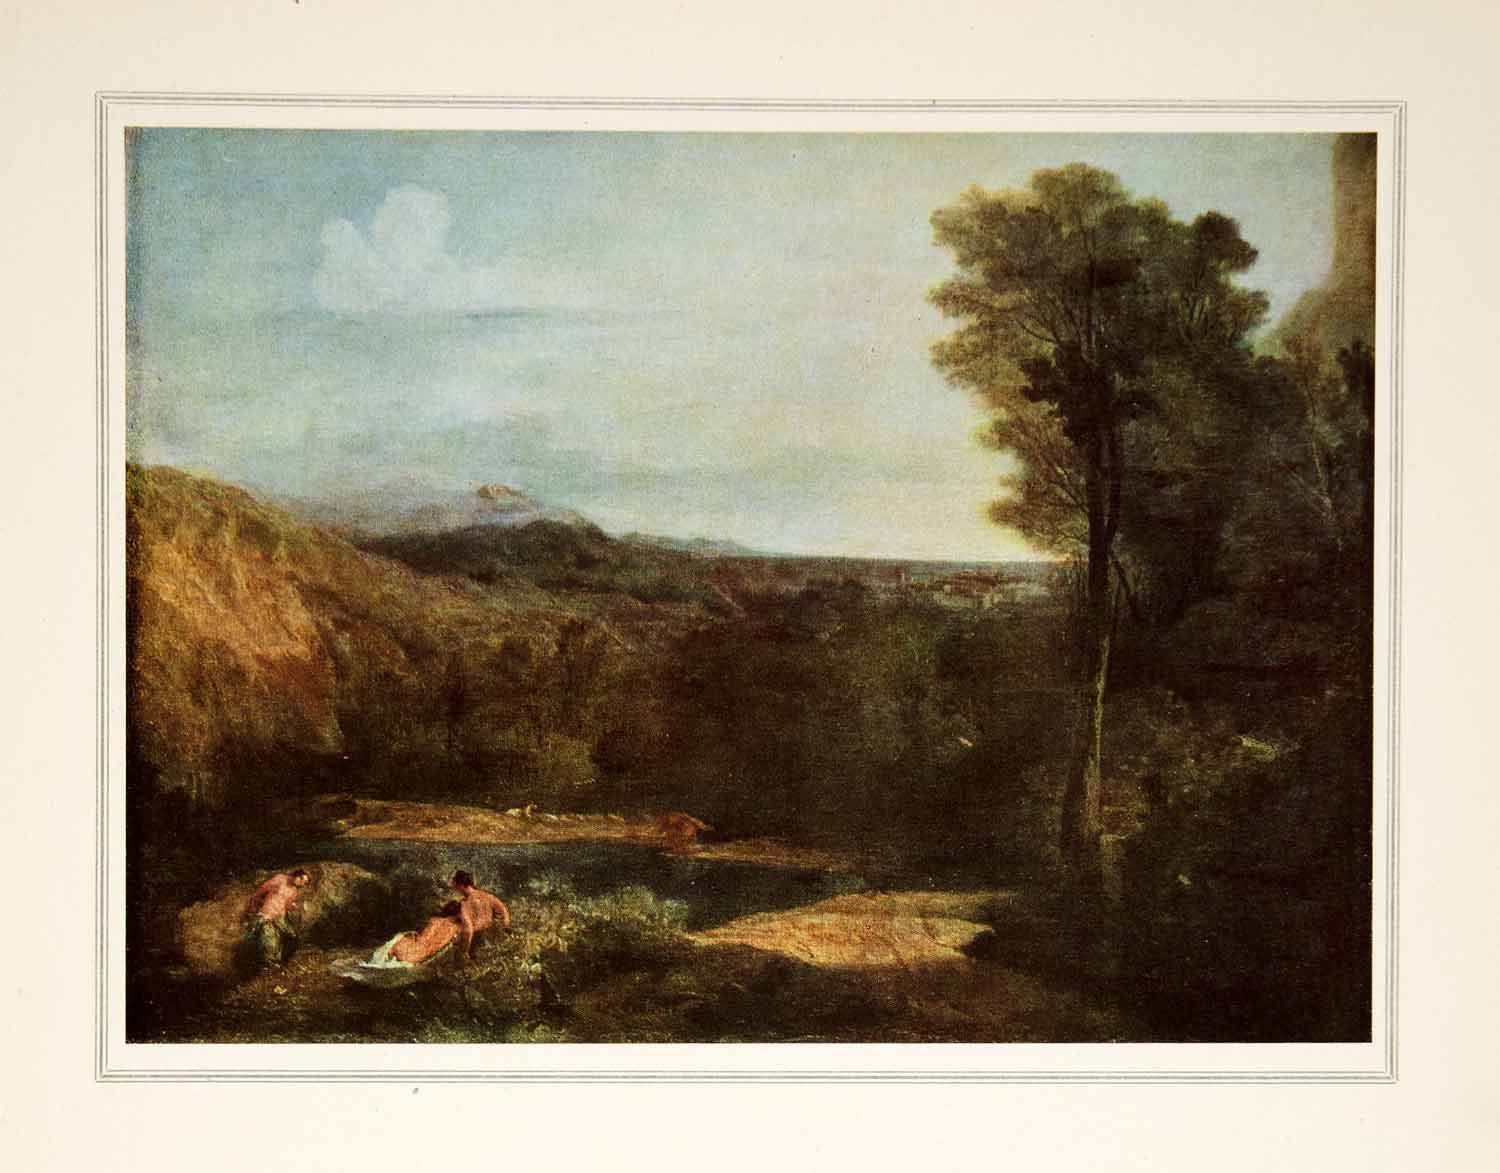 1939 Photolithograph Turner Echo Narcissus Landscape Nude Mountain Nymph XAW6